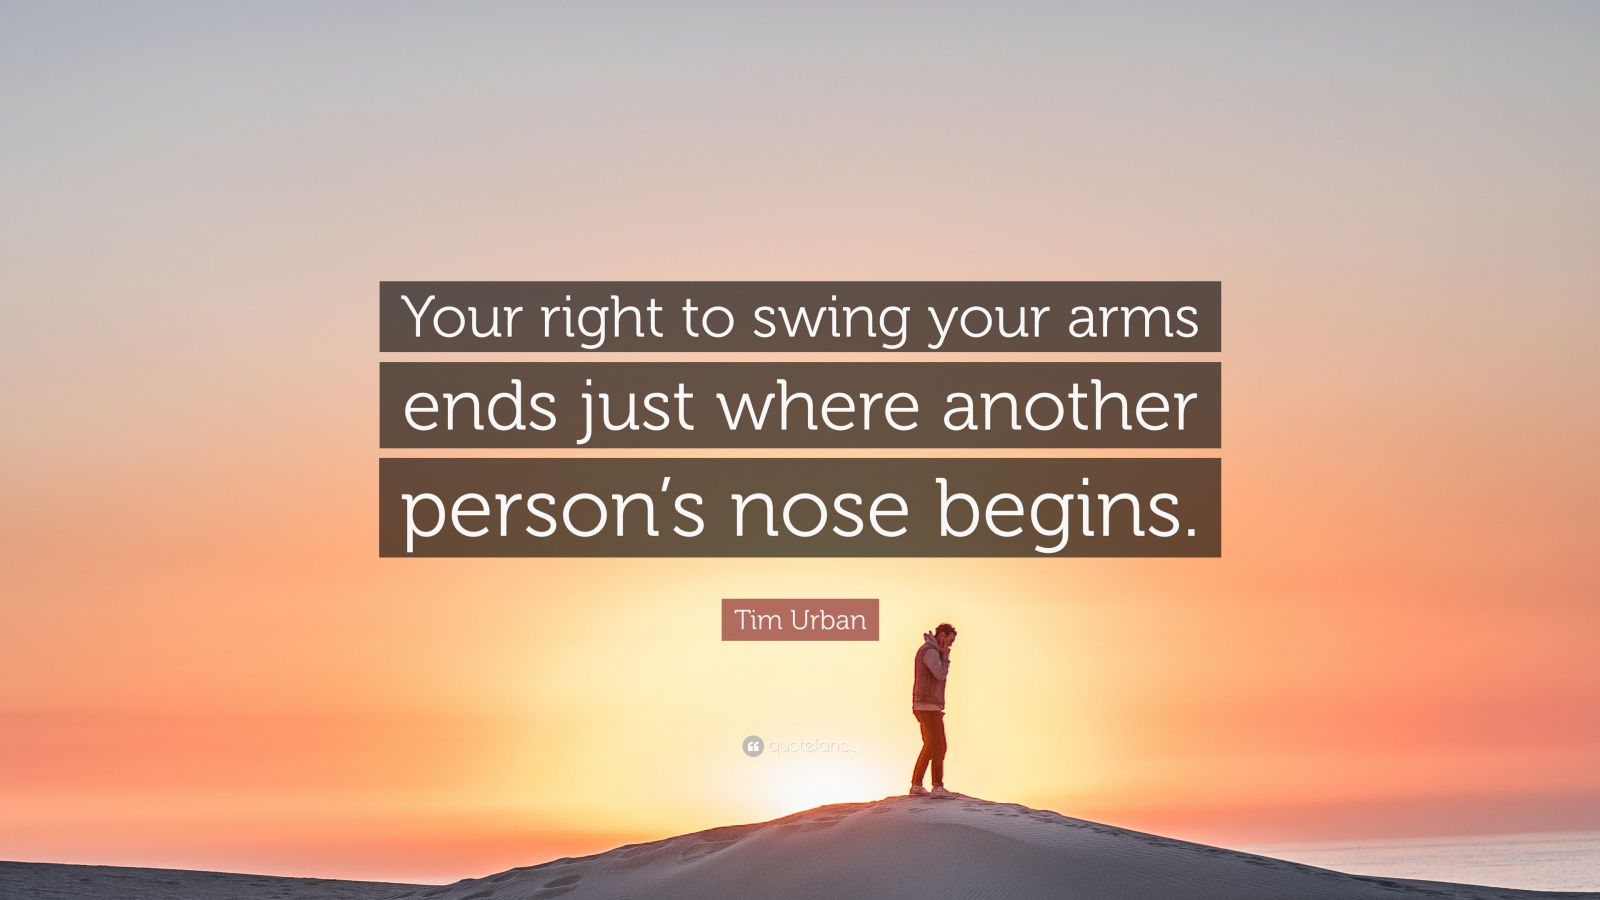 Tim Urban Quote: “Your right to swing your arms ends just where another ...